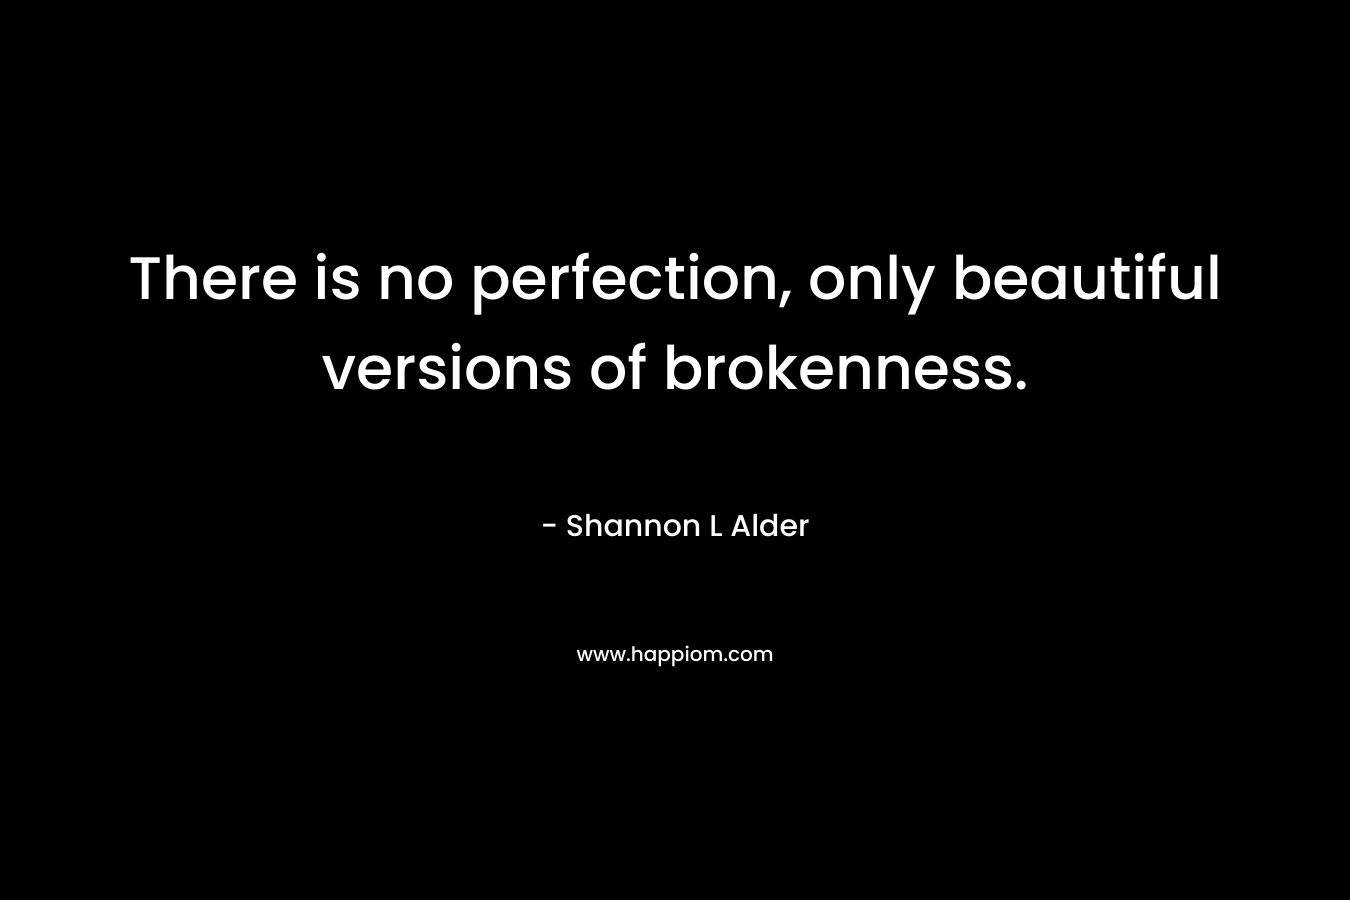 There is no perfection, only beautiful versions of brokenness.